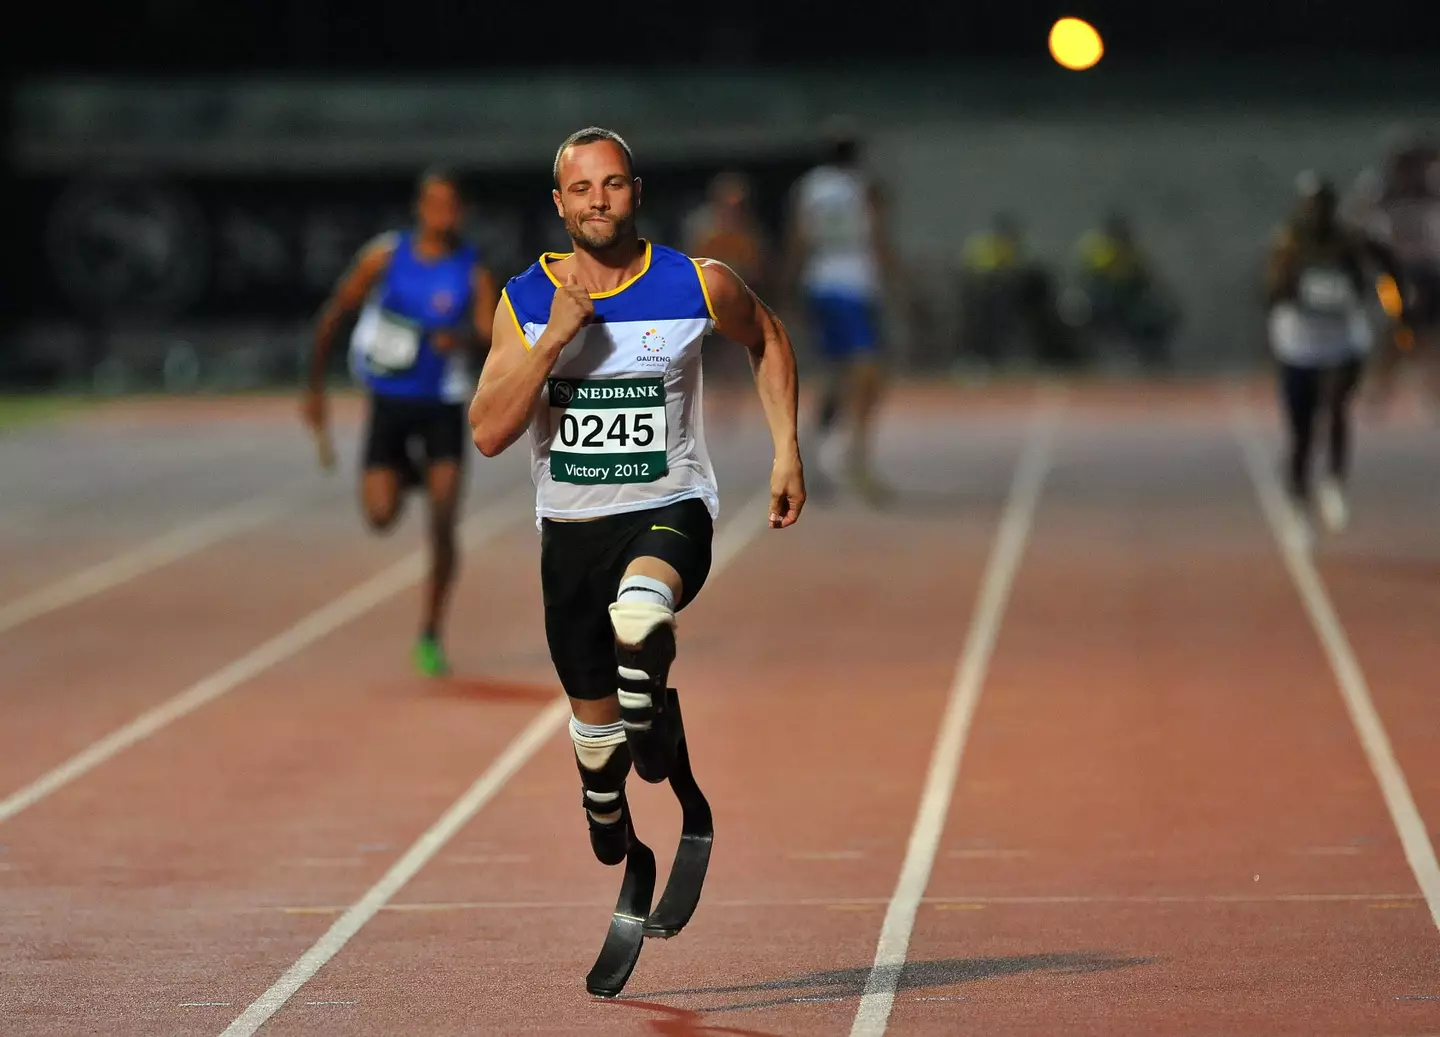 Oscar Pistorius competed in the Olympics before Steenkamp's death.